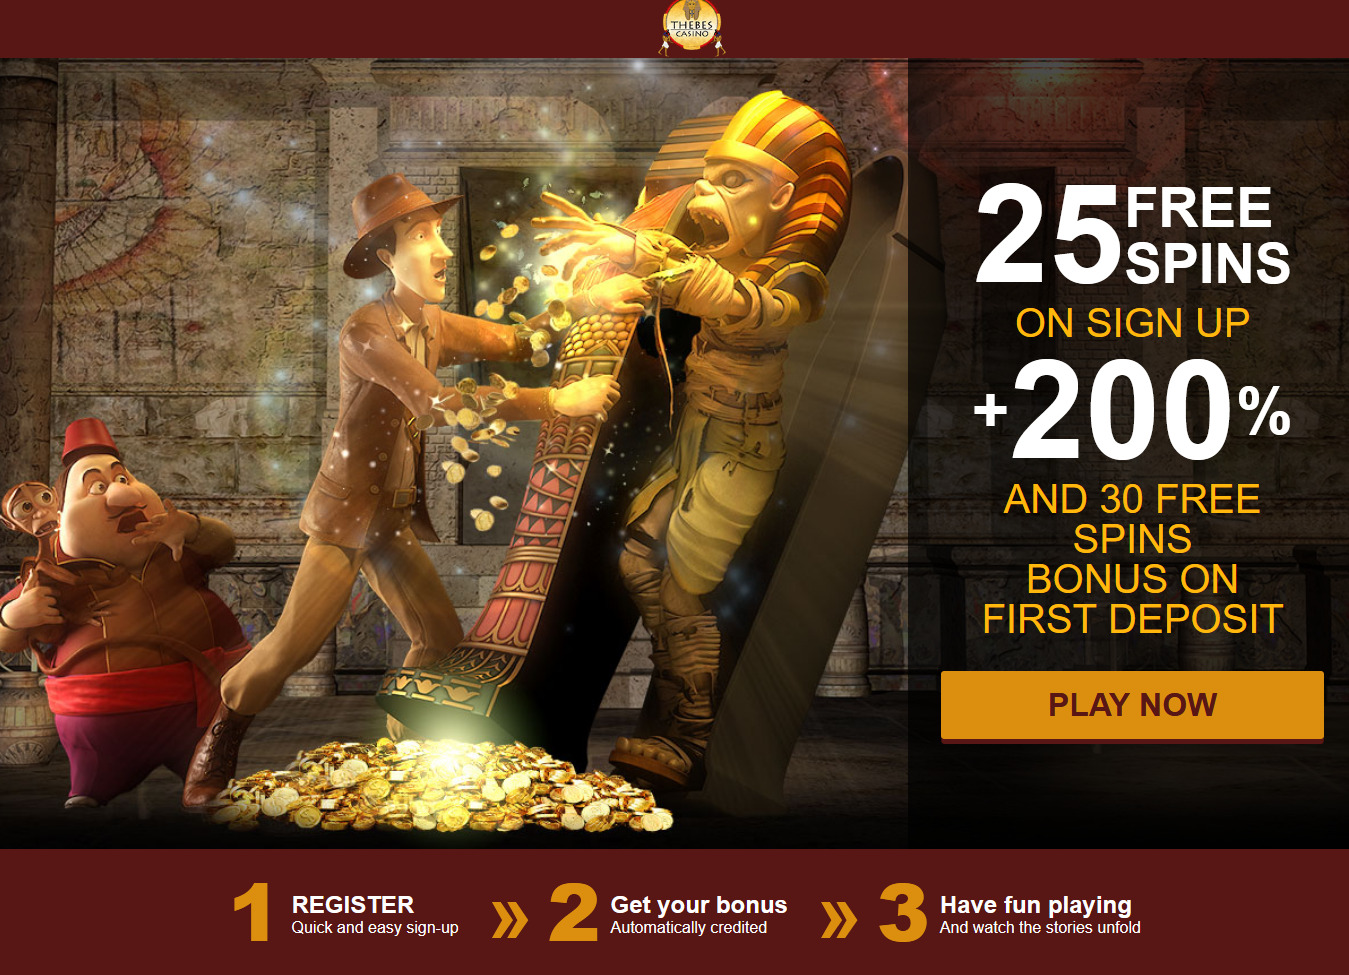 25 FREE SPINS ON SIGN UP + 200 % AND 30 FREE SPINS BONUS ON FIRST DEPOSIT